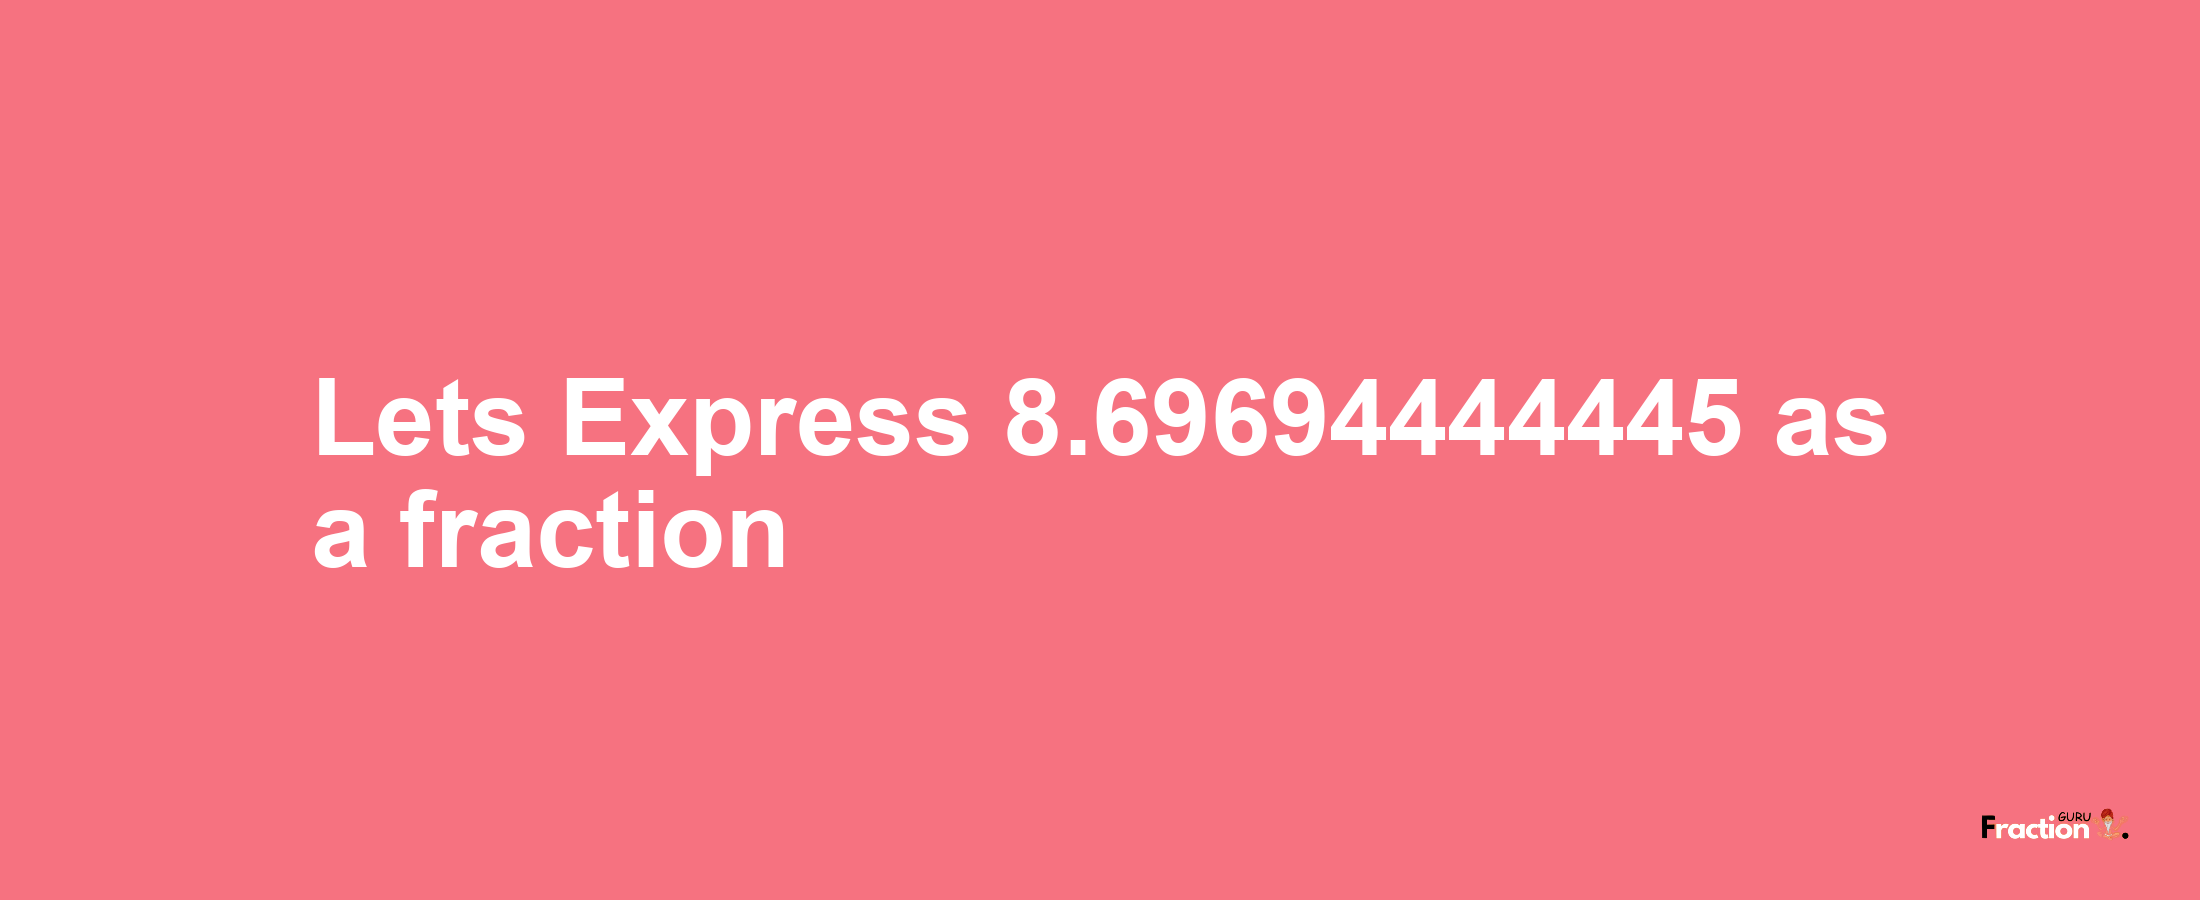 Lets Express 8.69694444445 as afraction